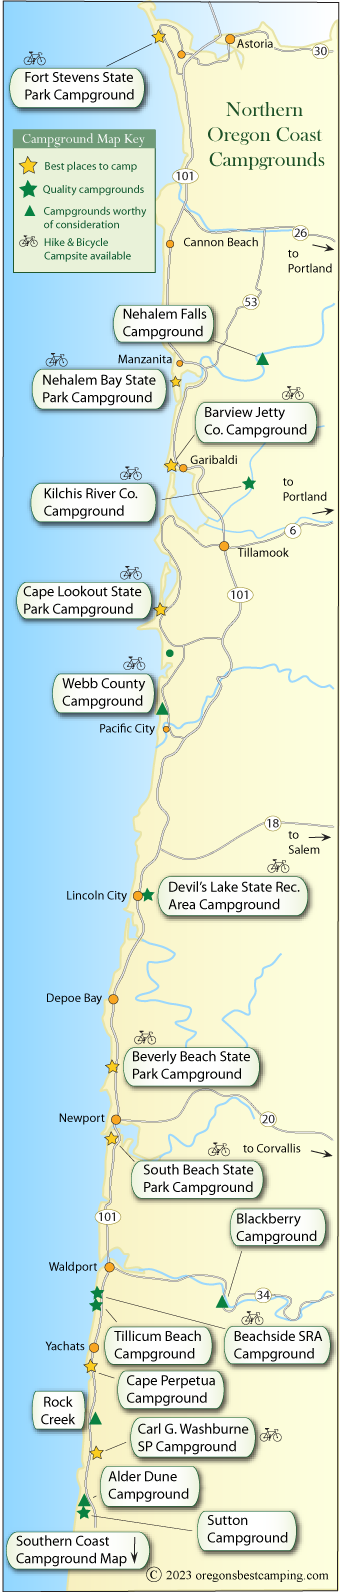 map of campgrounds along the northern half of the Oregon coast